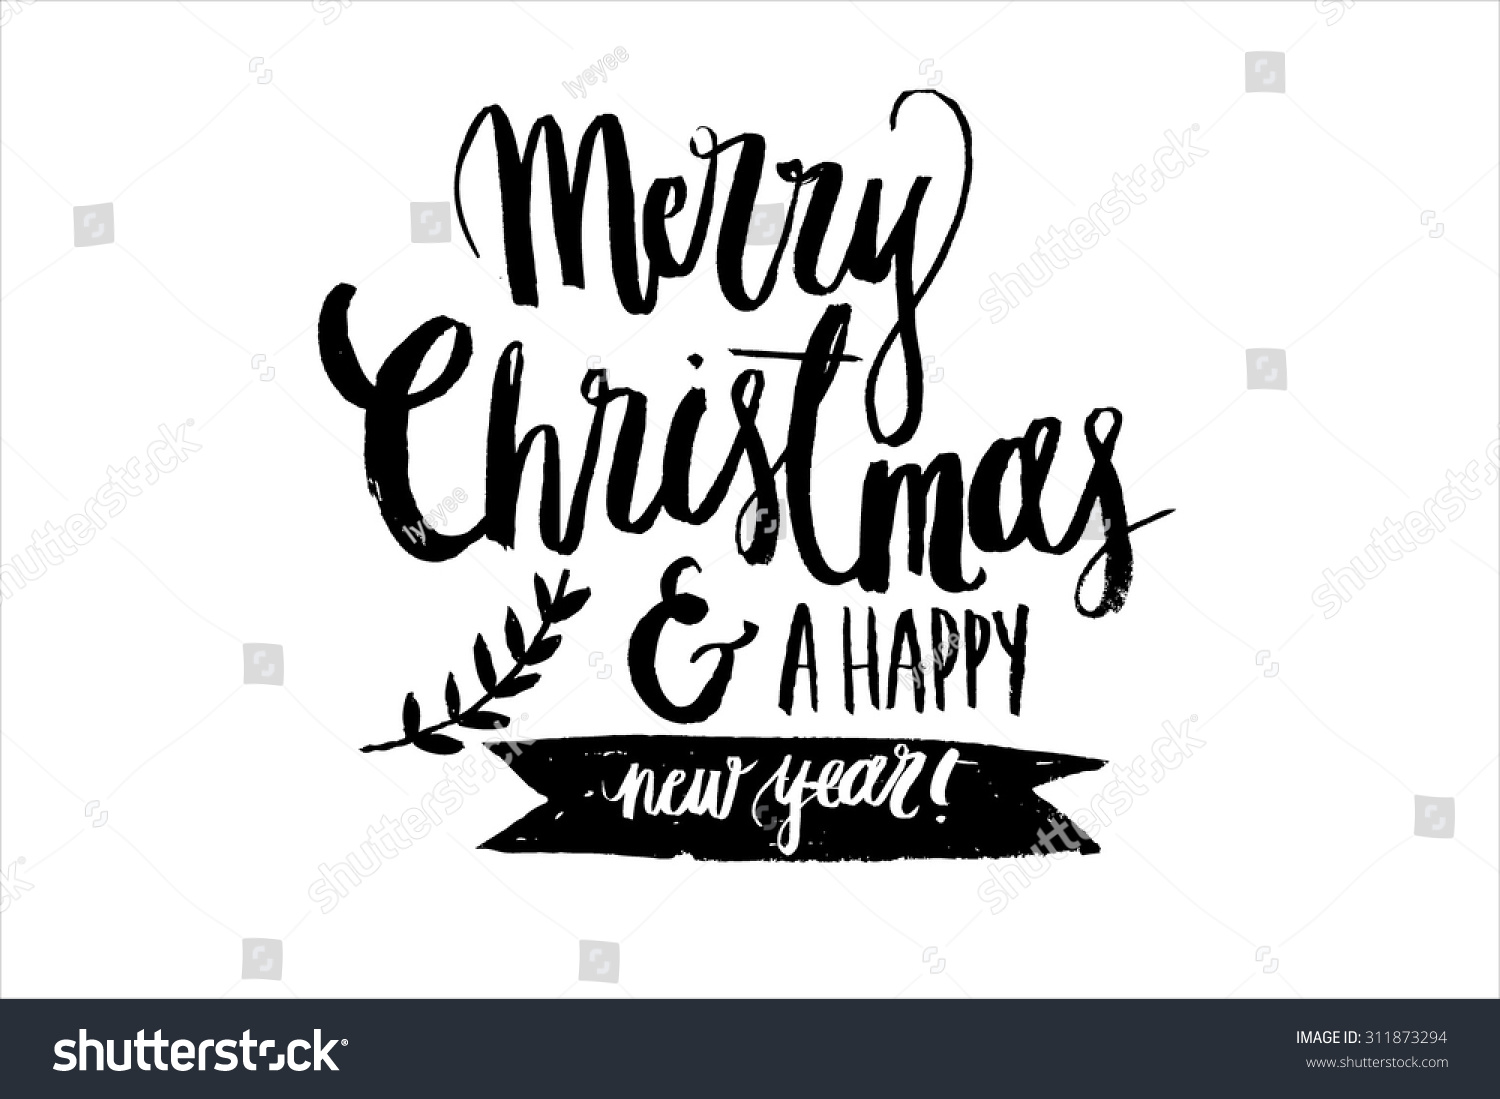 Merry Christmas And A Happy New Year Brush Calligraphy Vector ...